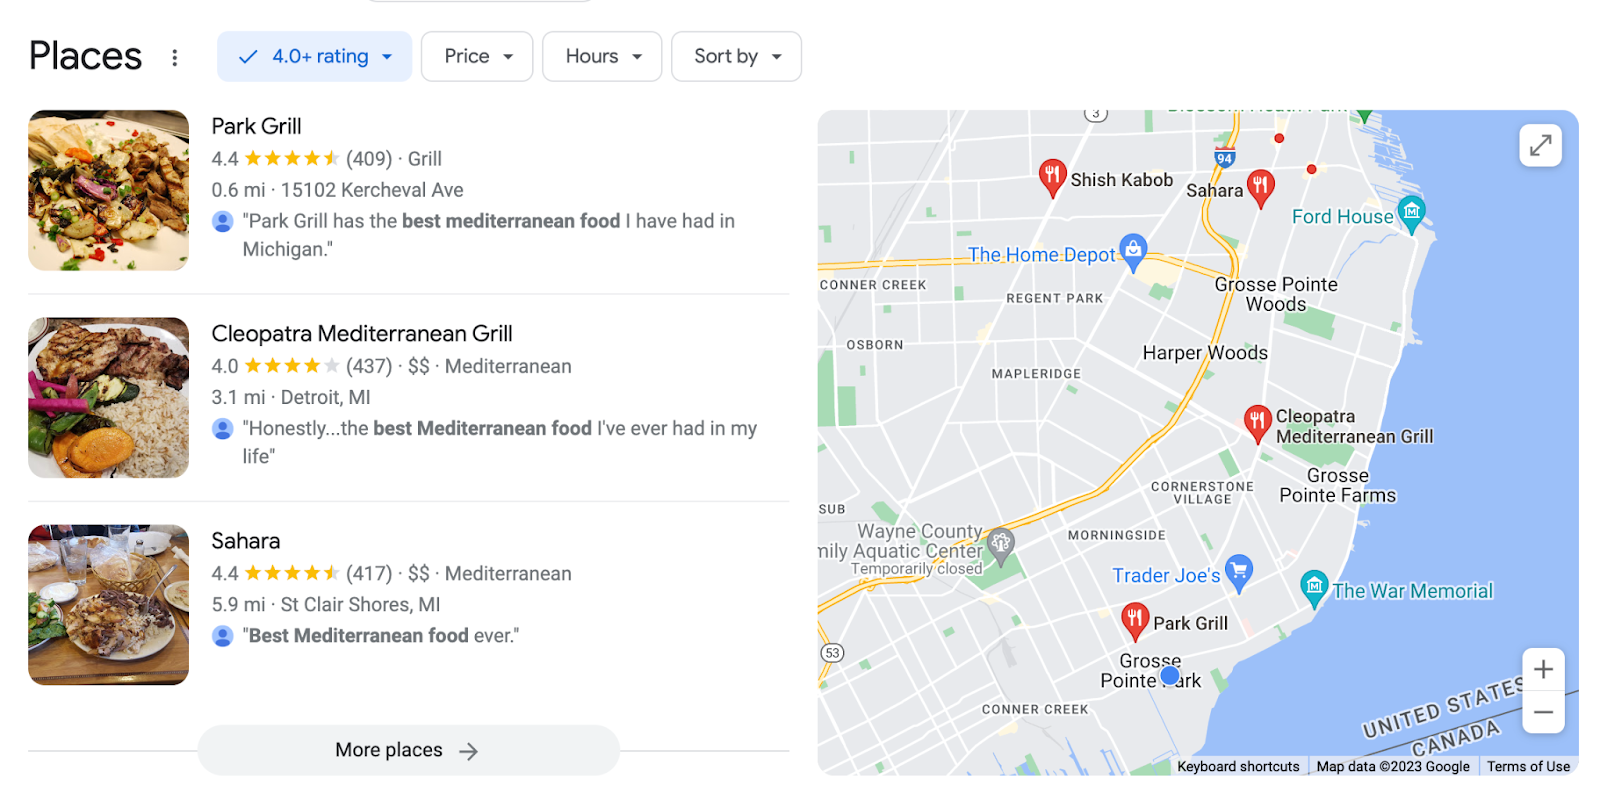 "Places" section on Google for “best Mediterranean food near me” search in Detroit